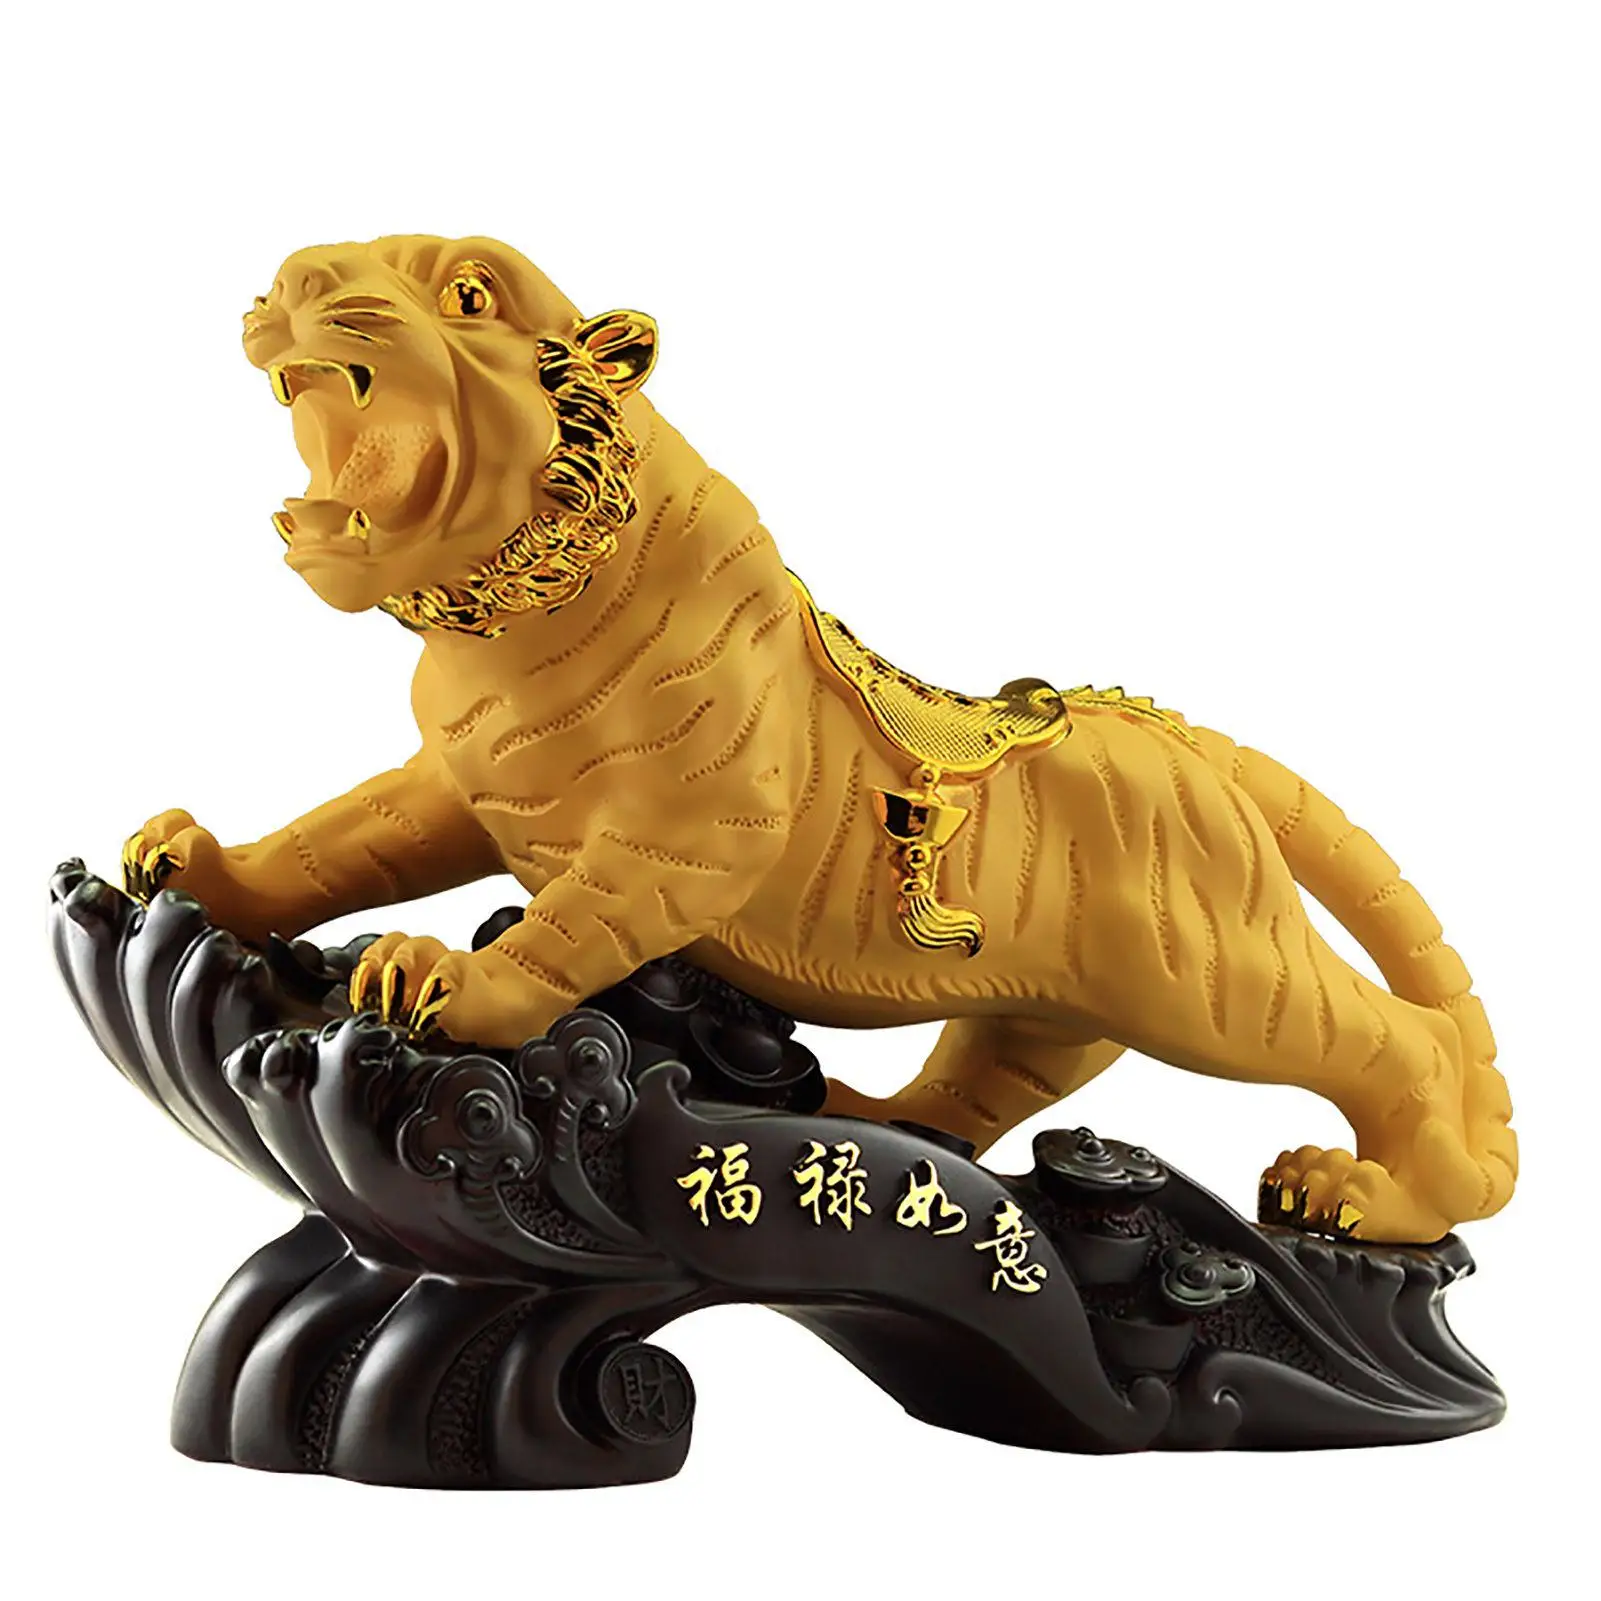 Golden Resin Chinese Zodiac Tiger Statue-Feng Shui Home Office Table Top Decor|Collectible Figurine